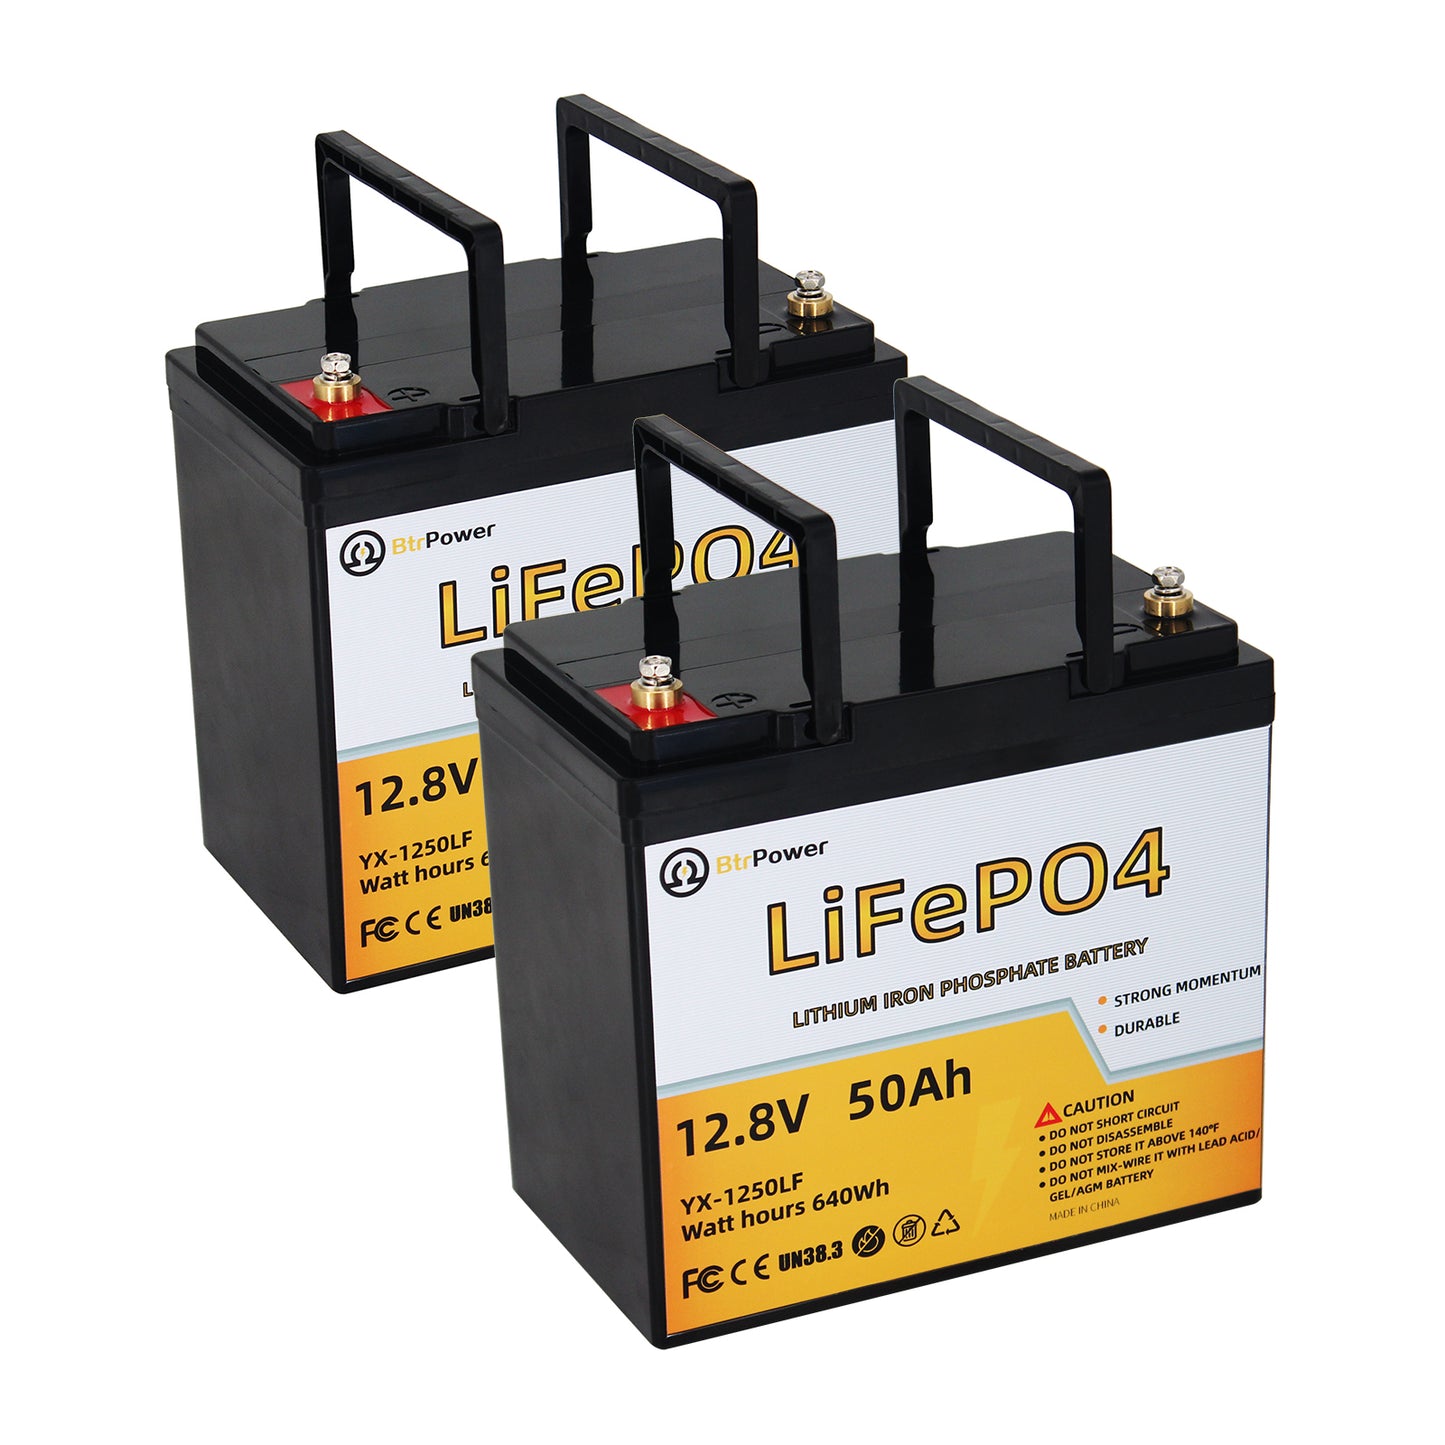 BtrPower 2 Pack Marine Lithium Lifepo4 Deep Cycle Battery 12v 50Ah for